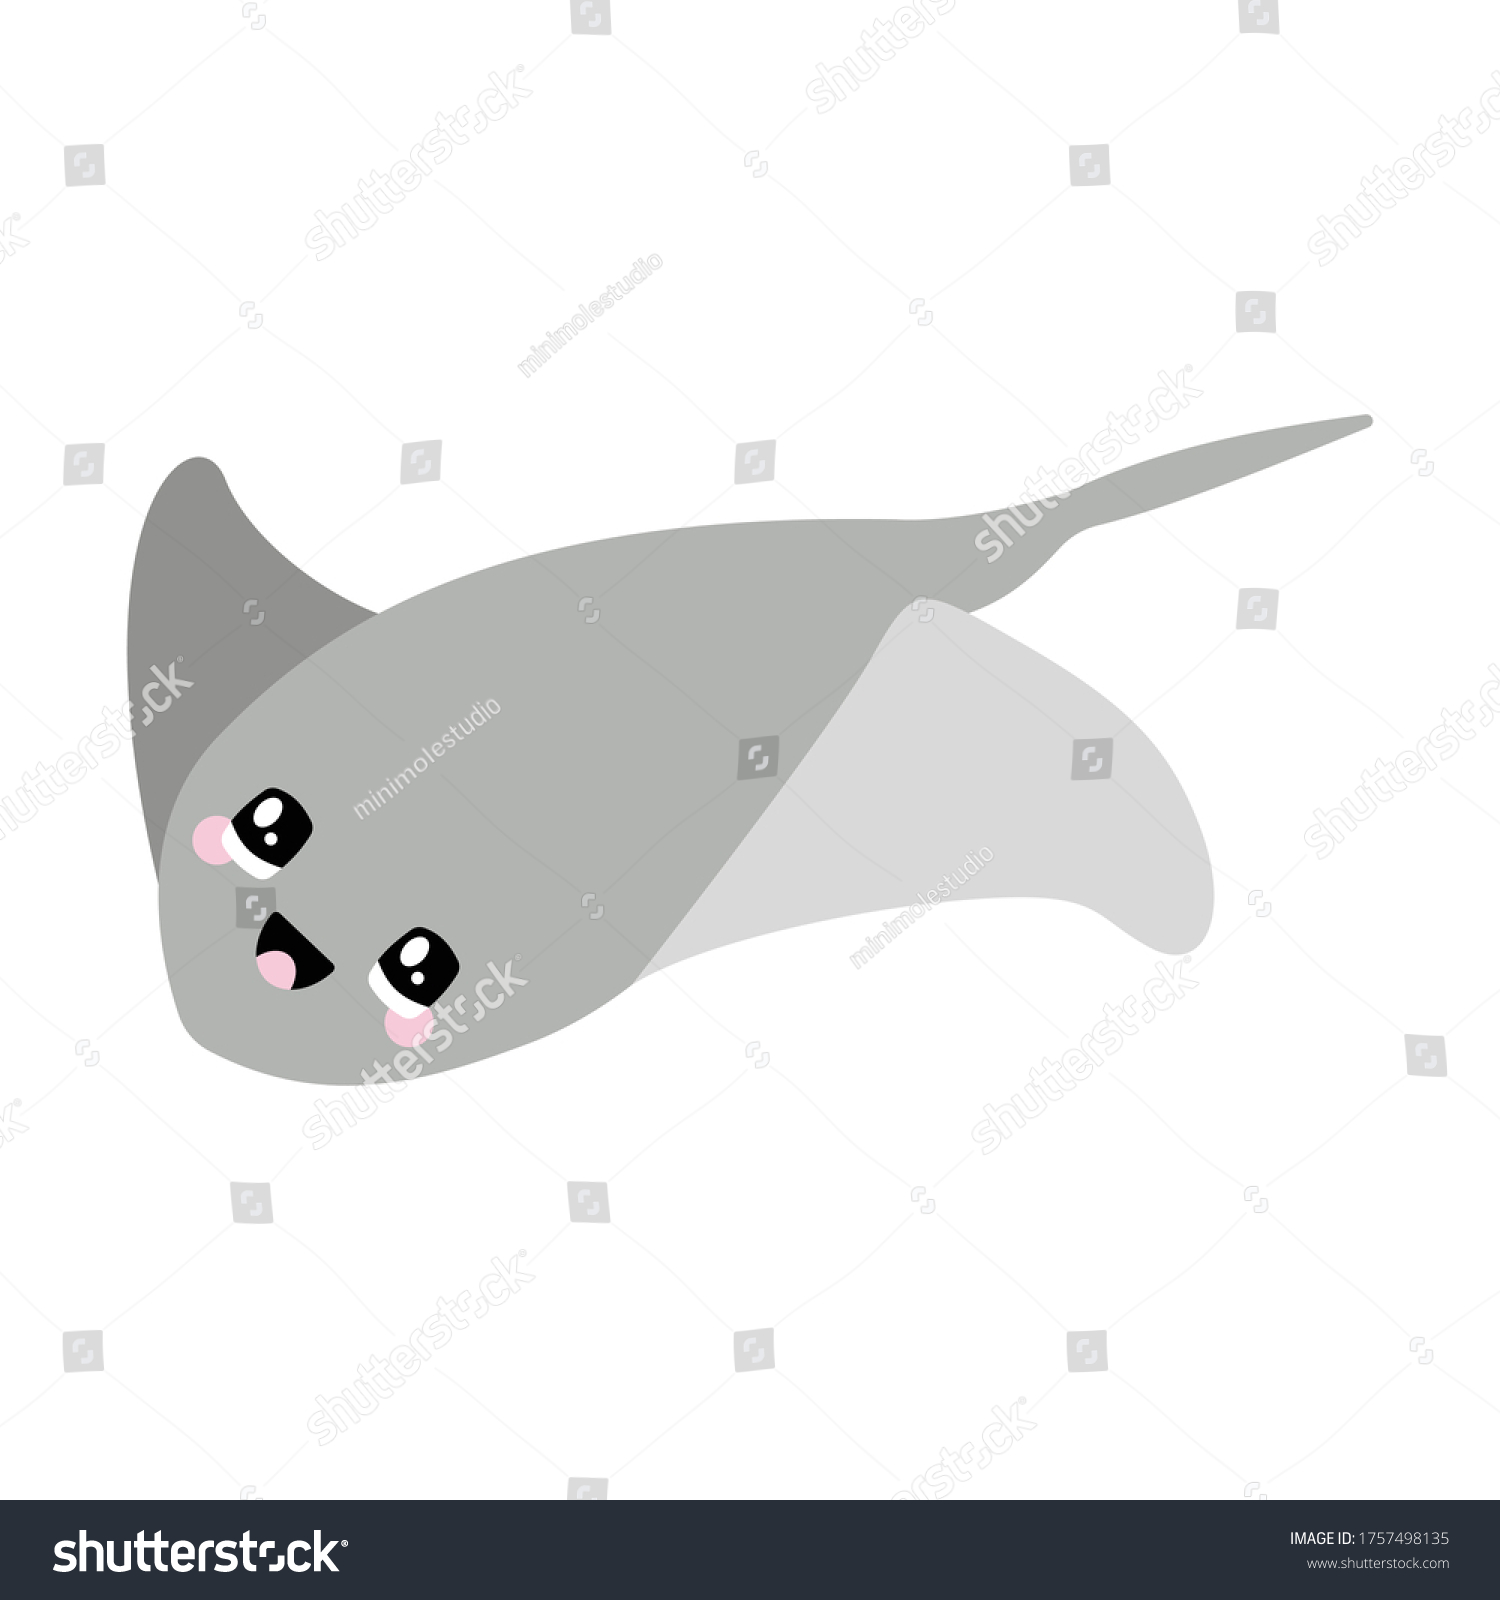 SVG of Vector illustration of a stingray with a cute face. Simple, flat kawaii style. svg